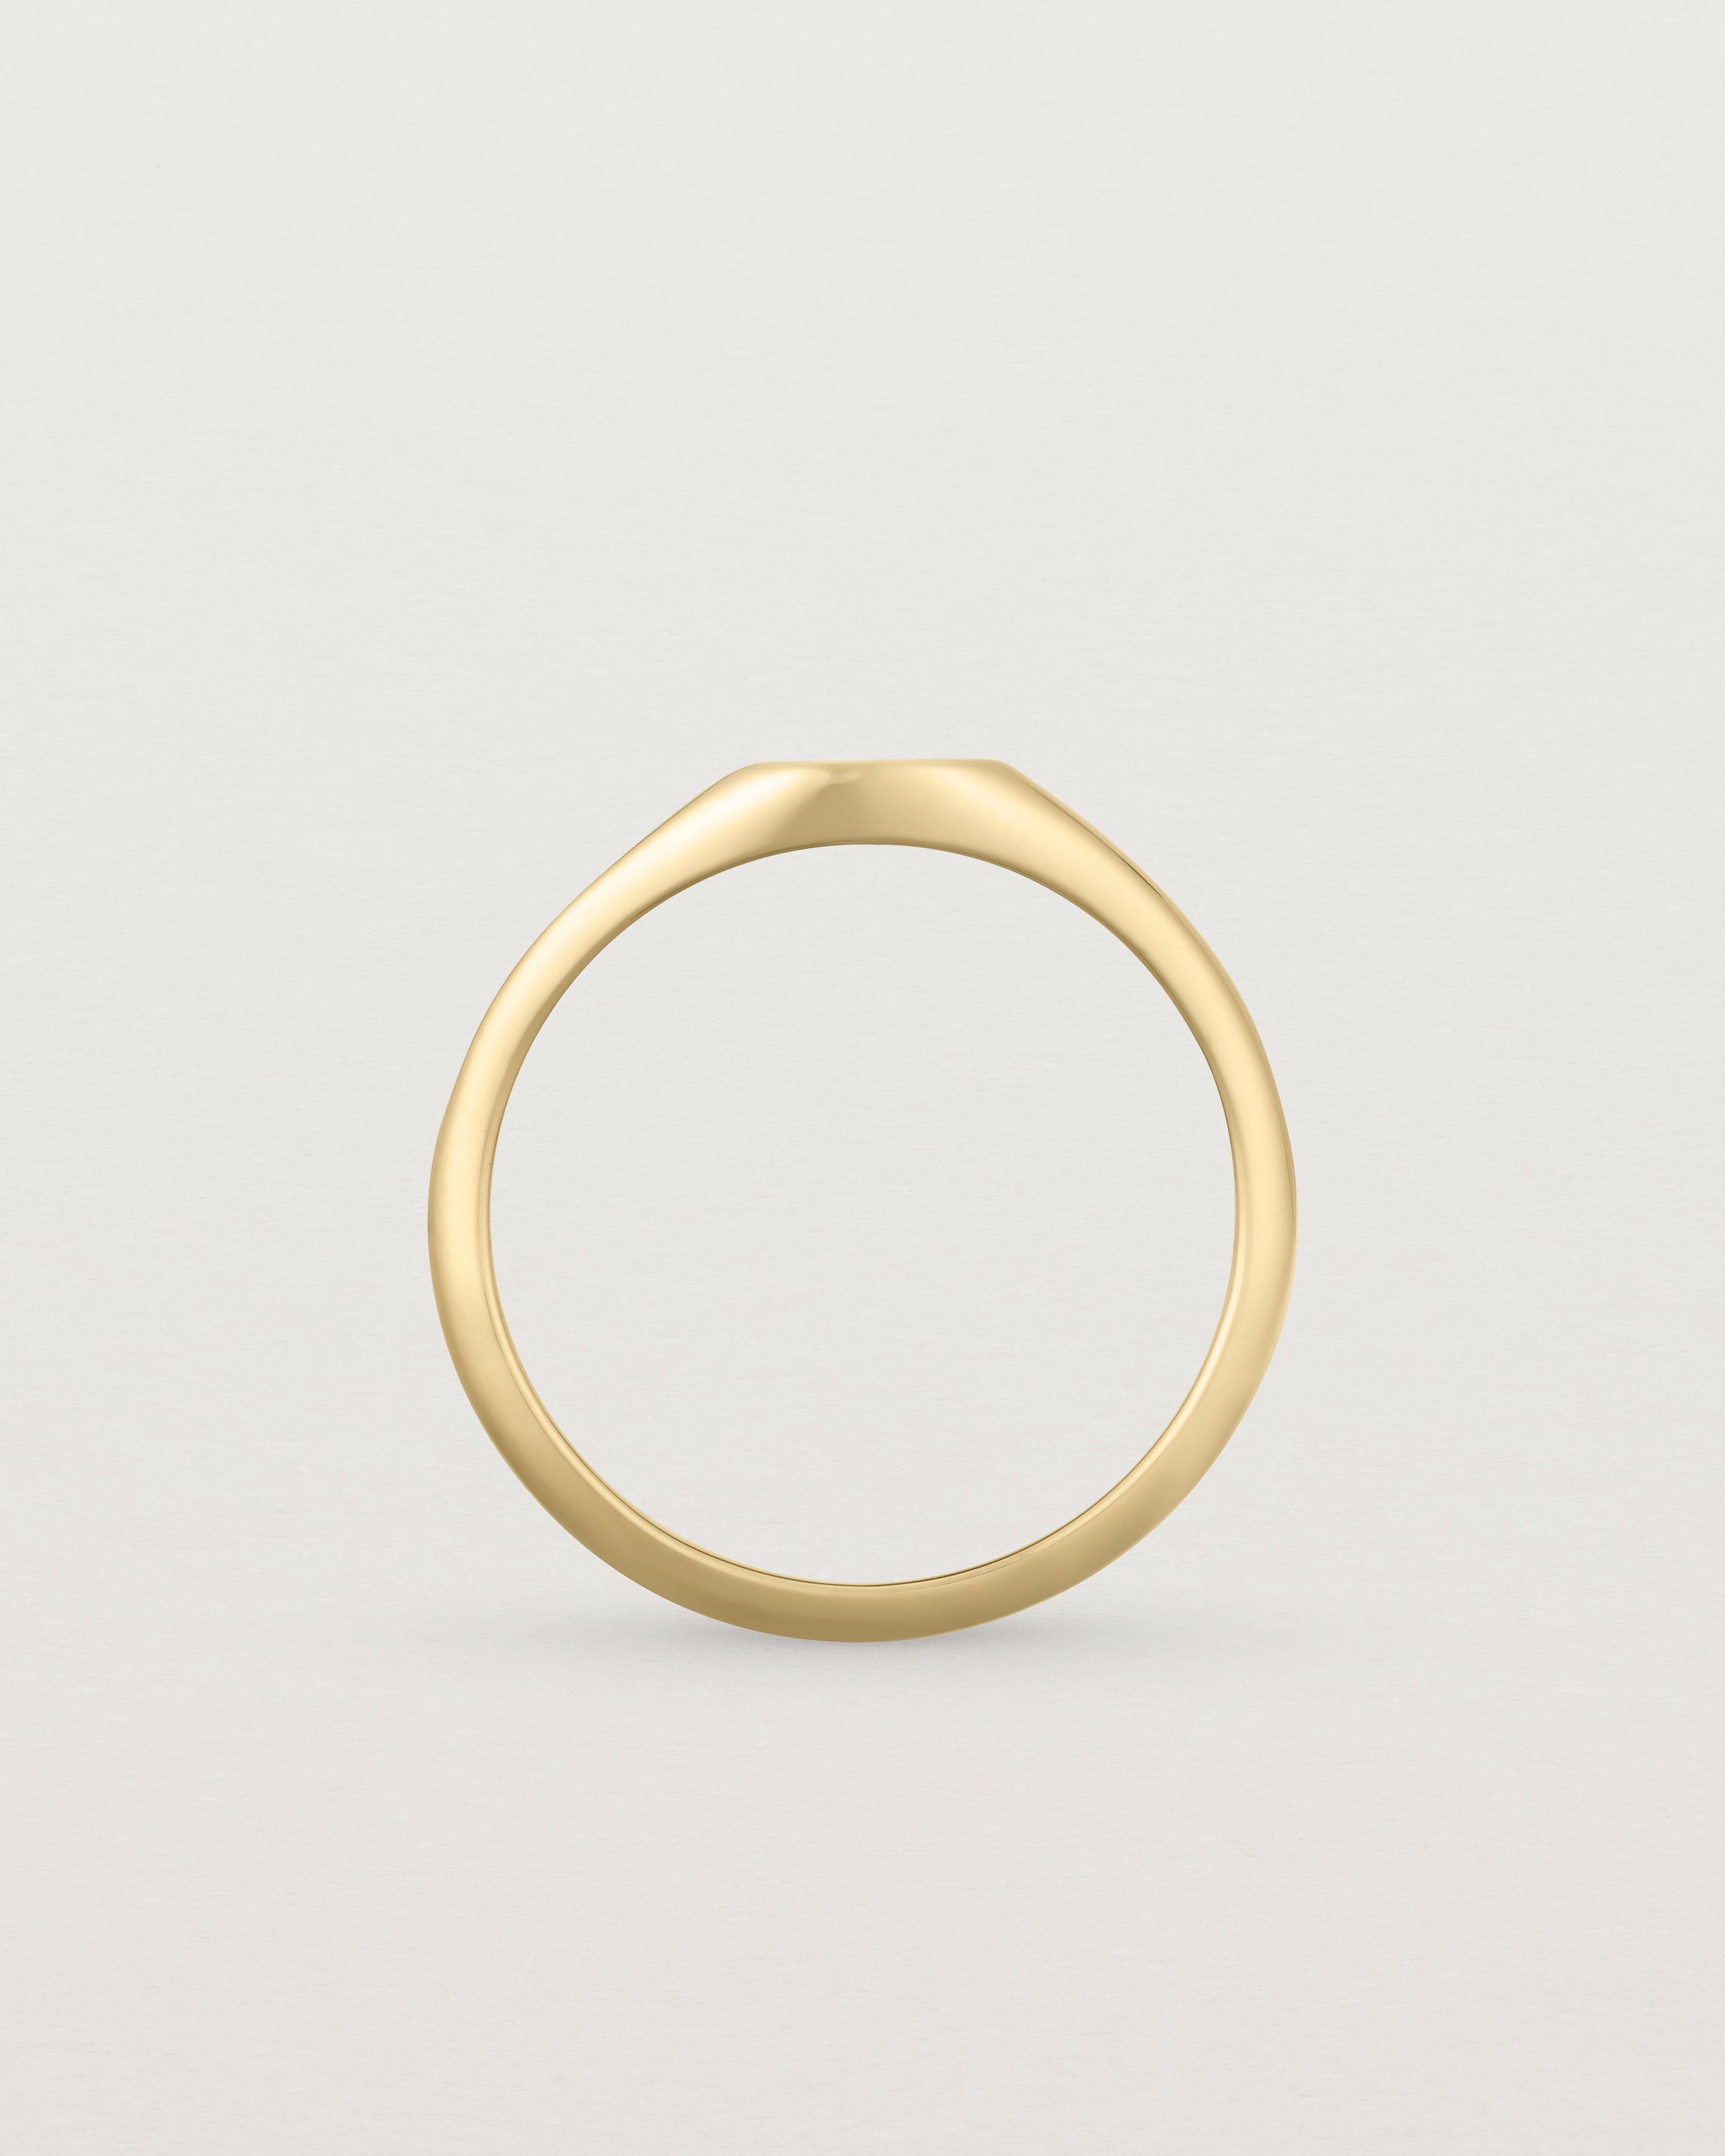 Standing view of a simple signet with an elongated rectangular face in yellow gold